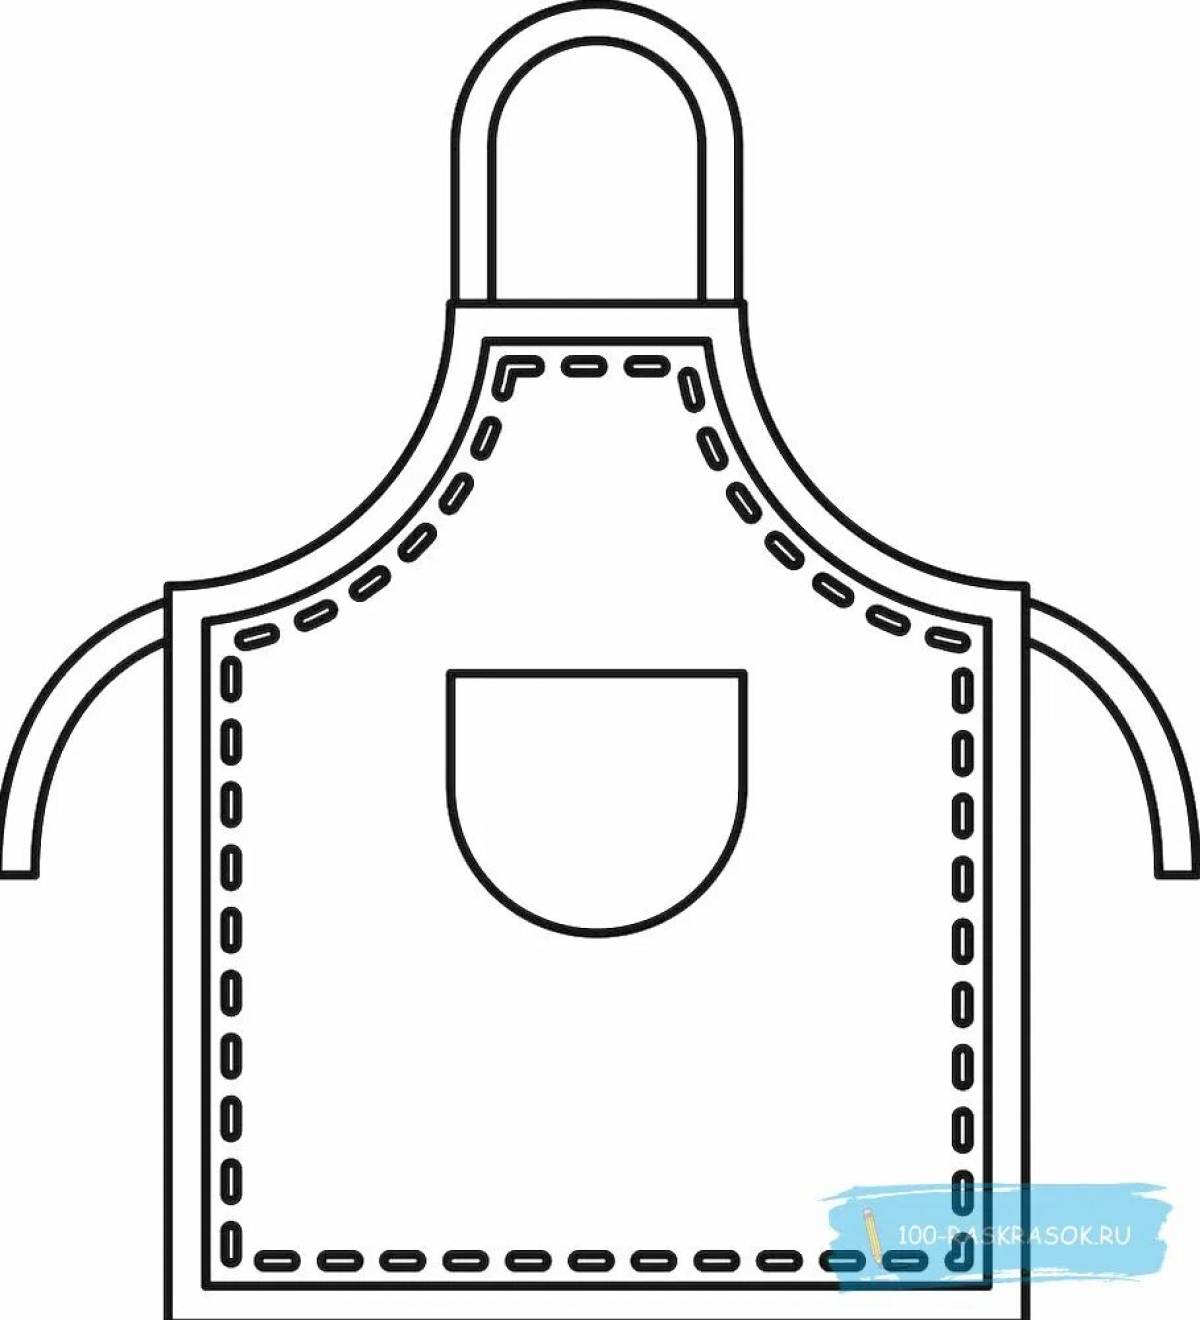 Colorful coloring apron for kids looking for colors